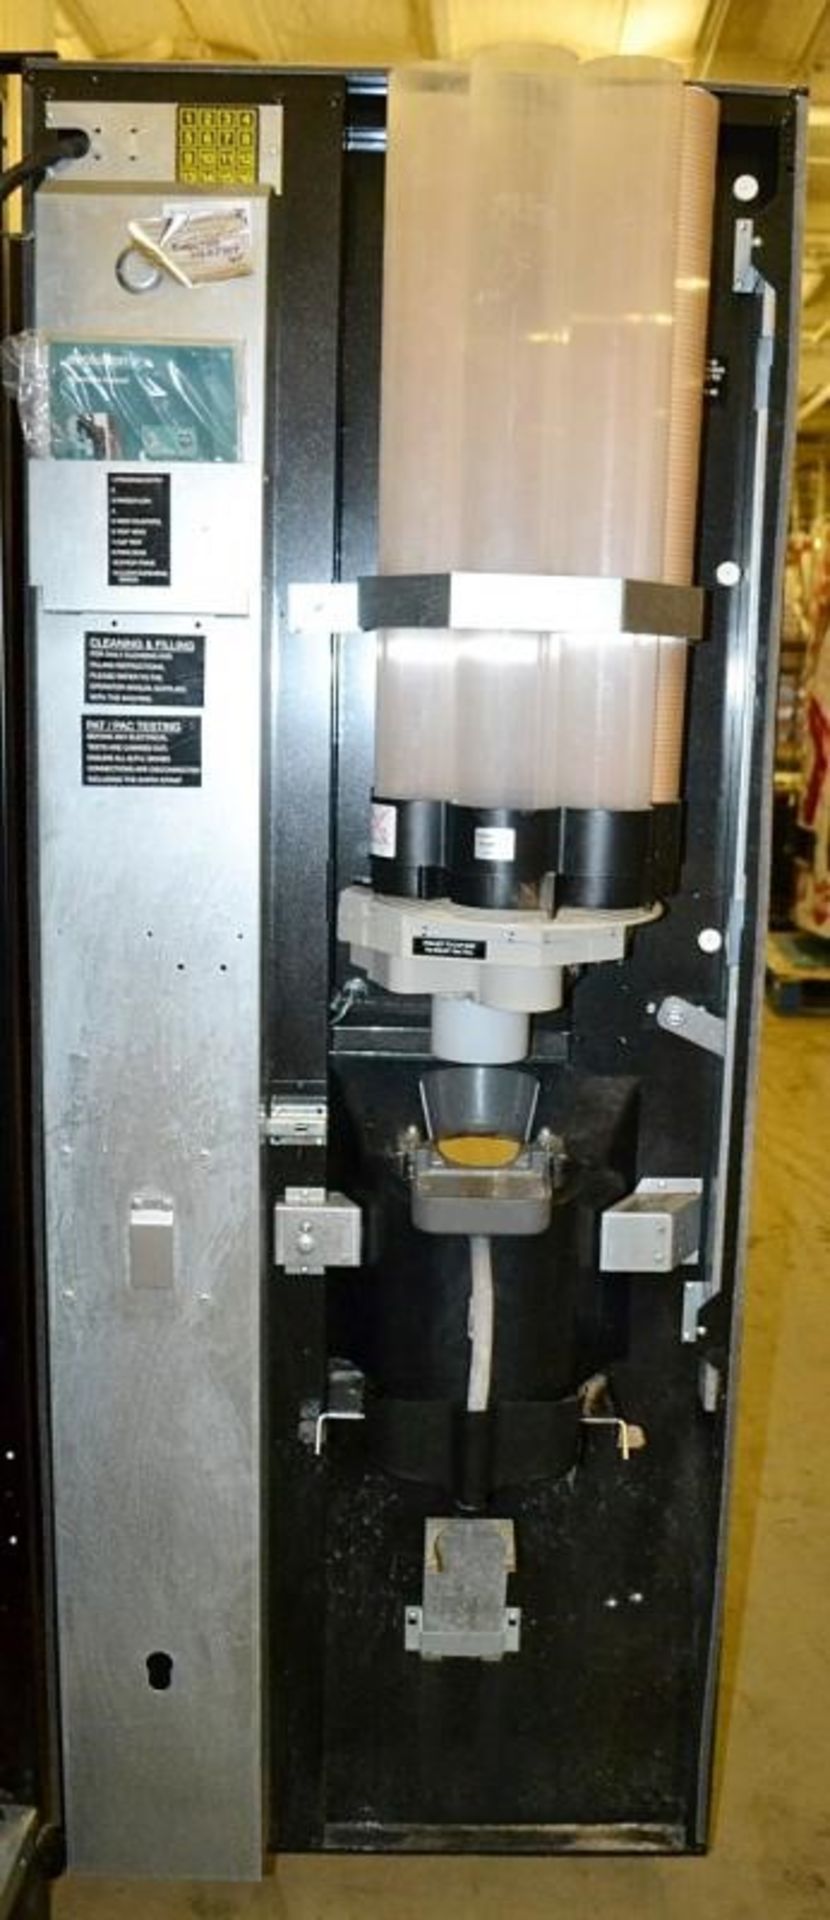 1 x Crane "Evolution" Coin-operated Hot Drinks Vending Machine - Recently taken From A Working Envir - Image 6 of 17